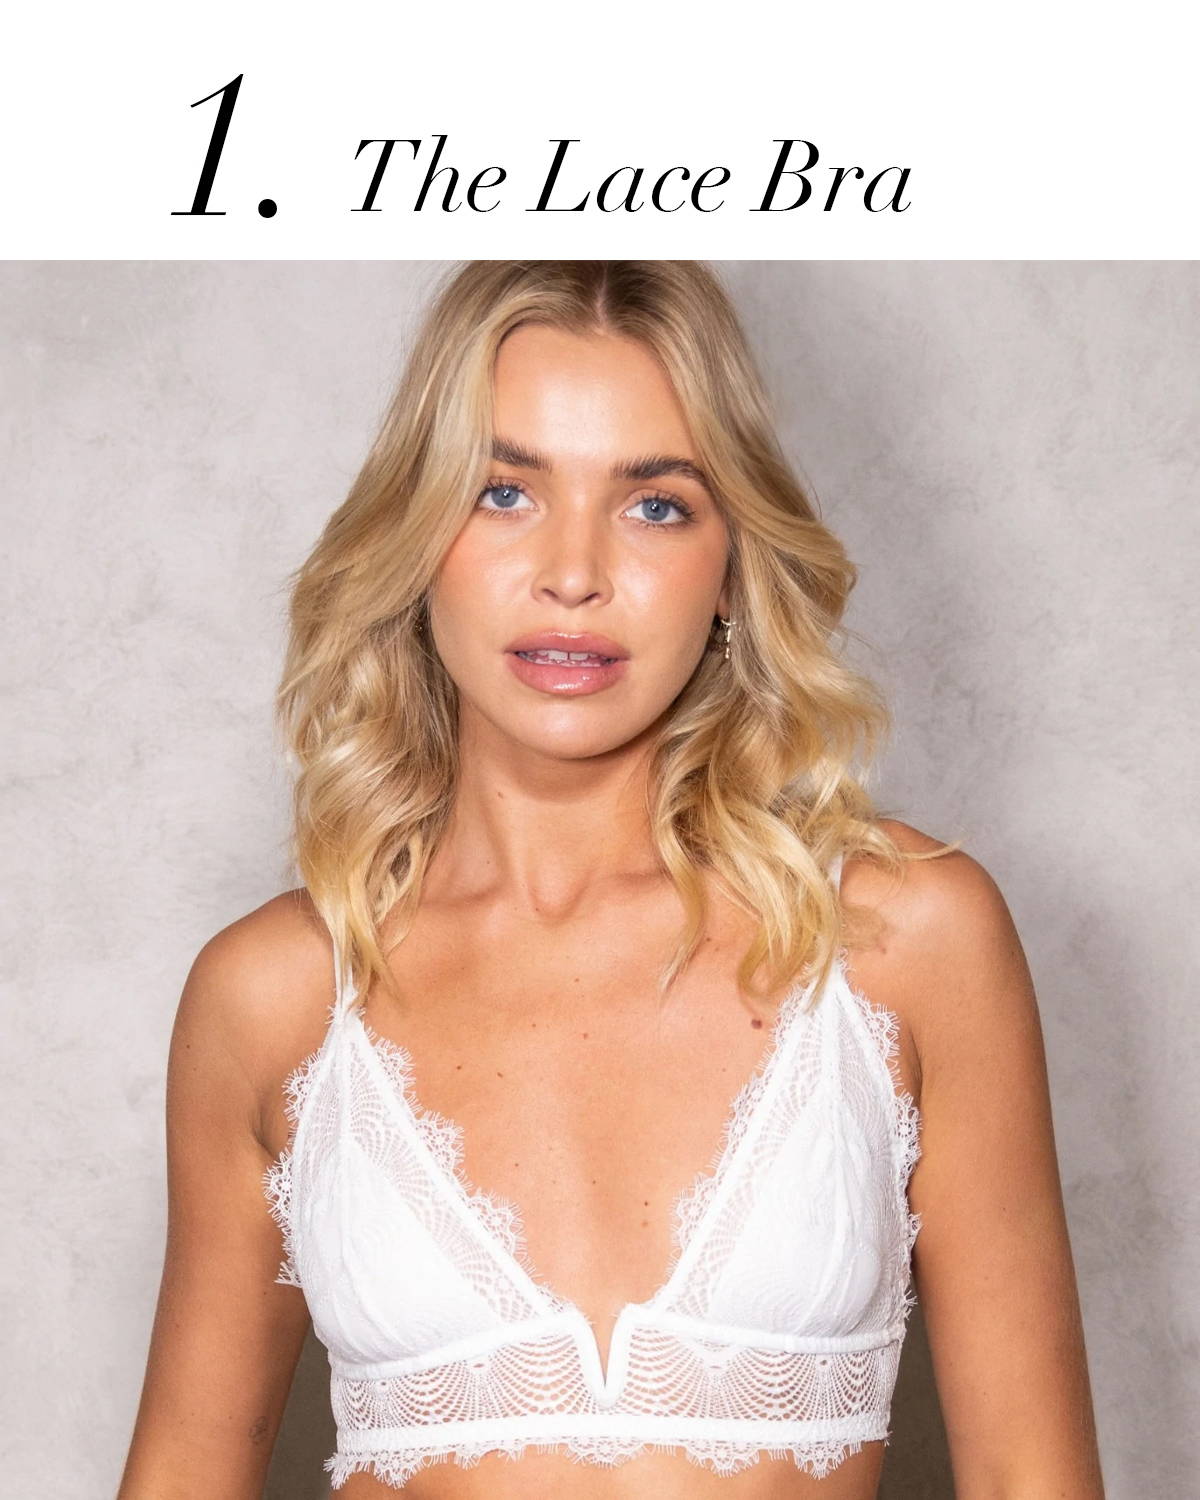 Types Of Bras Every Woman Should Own